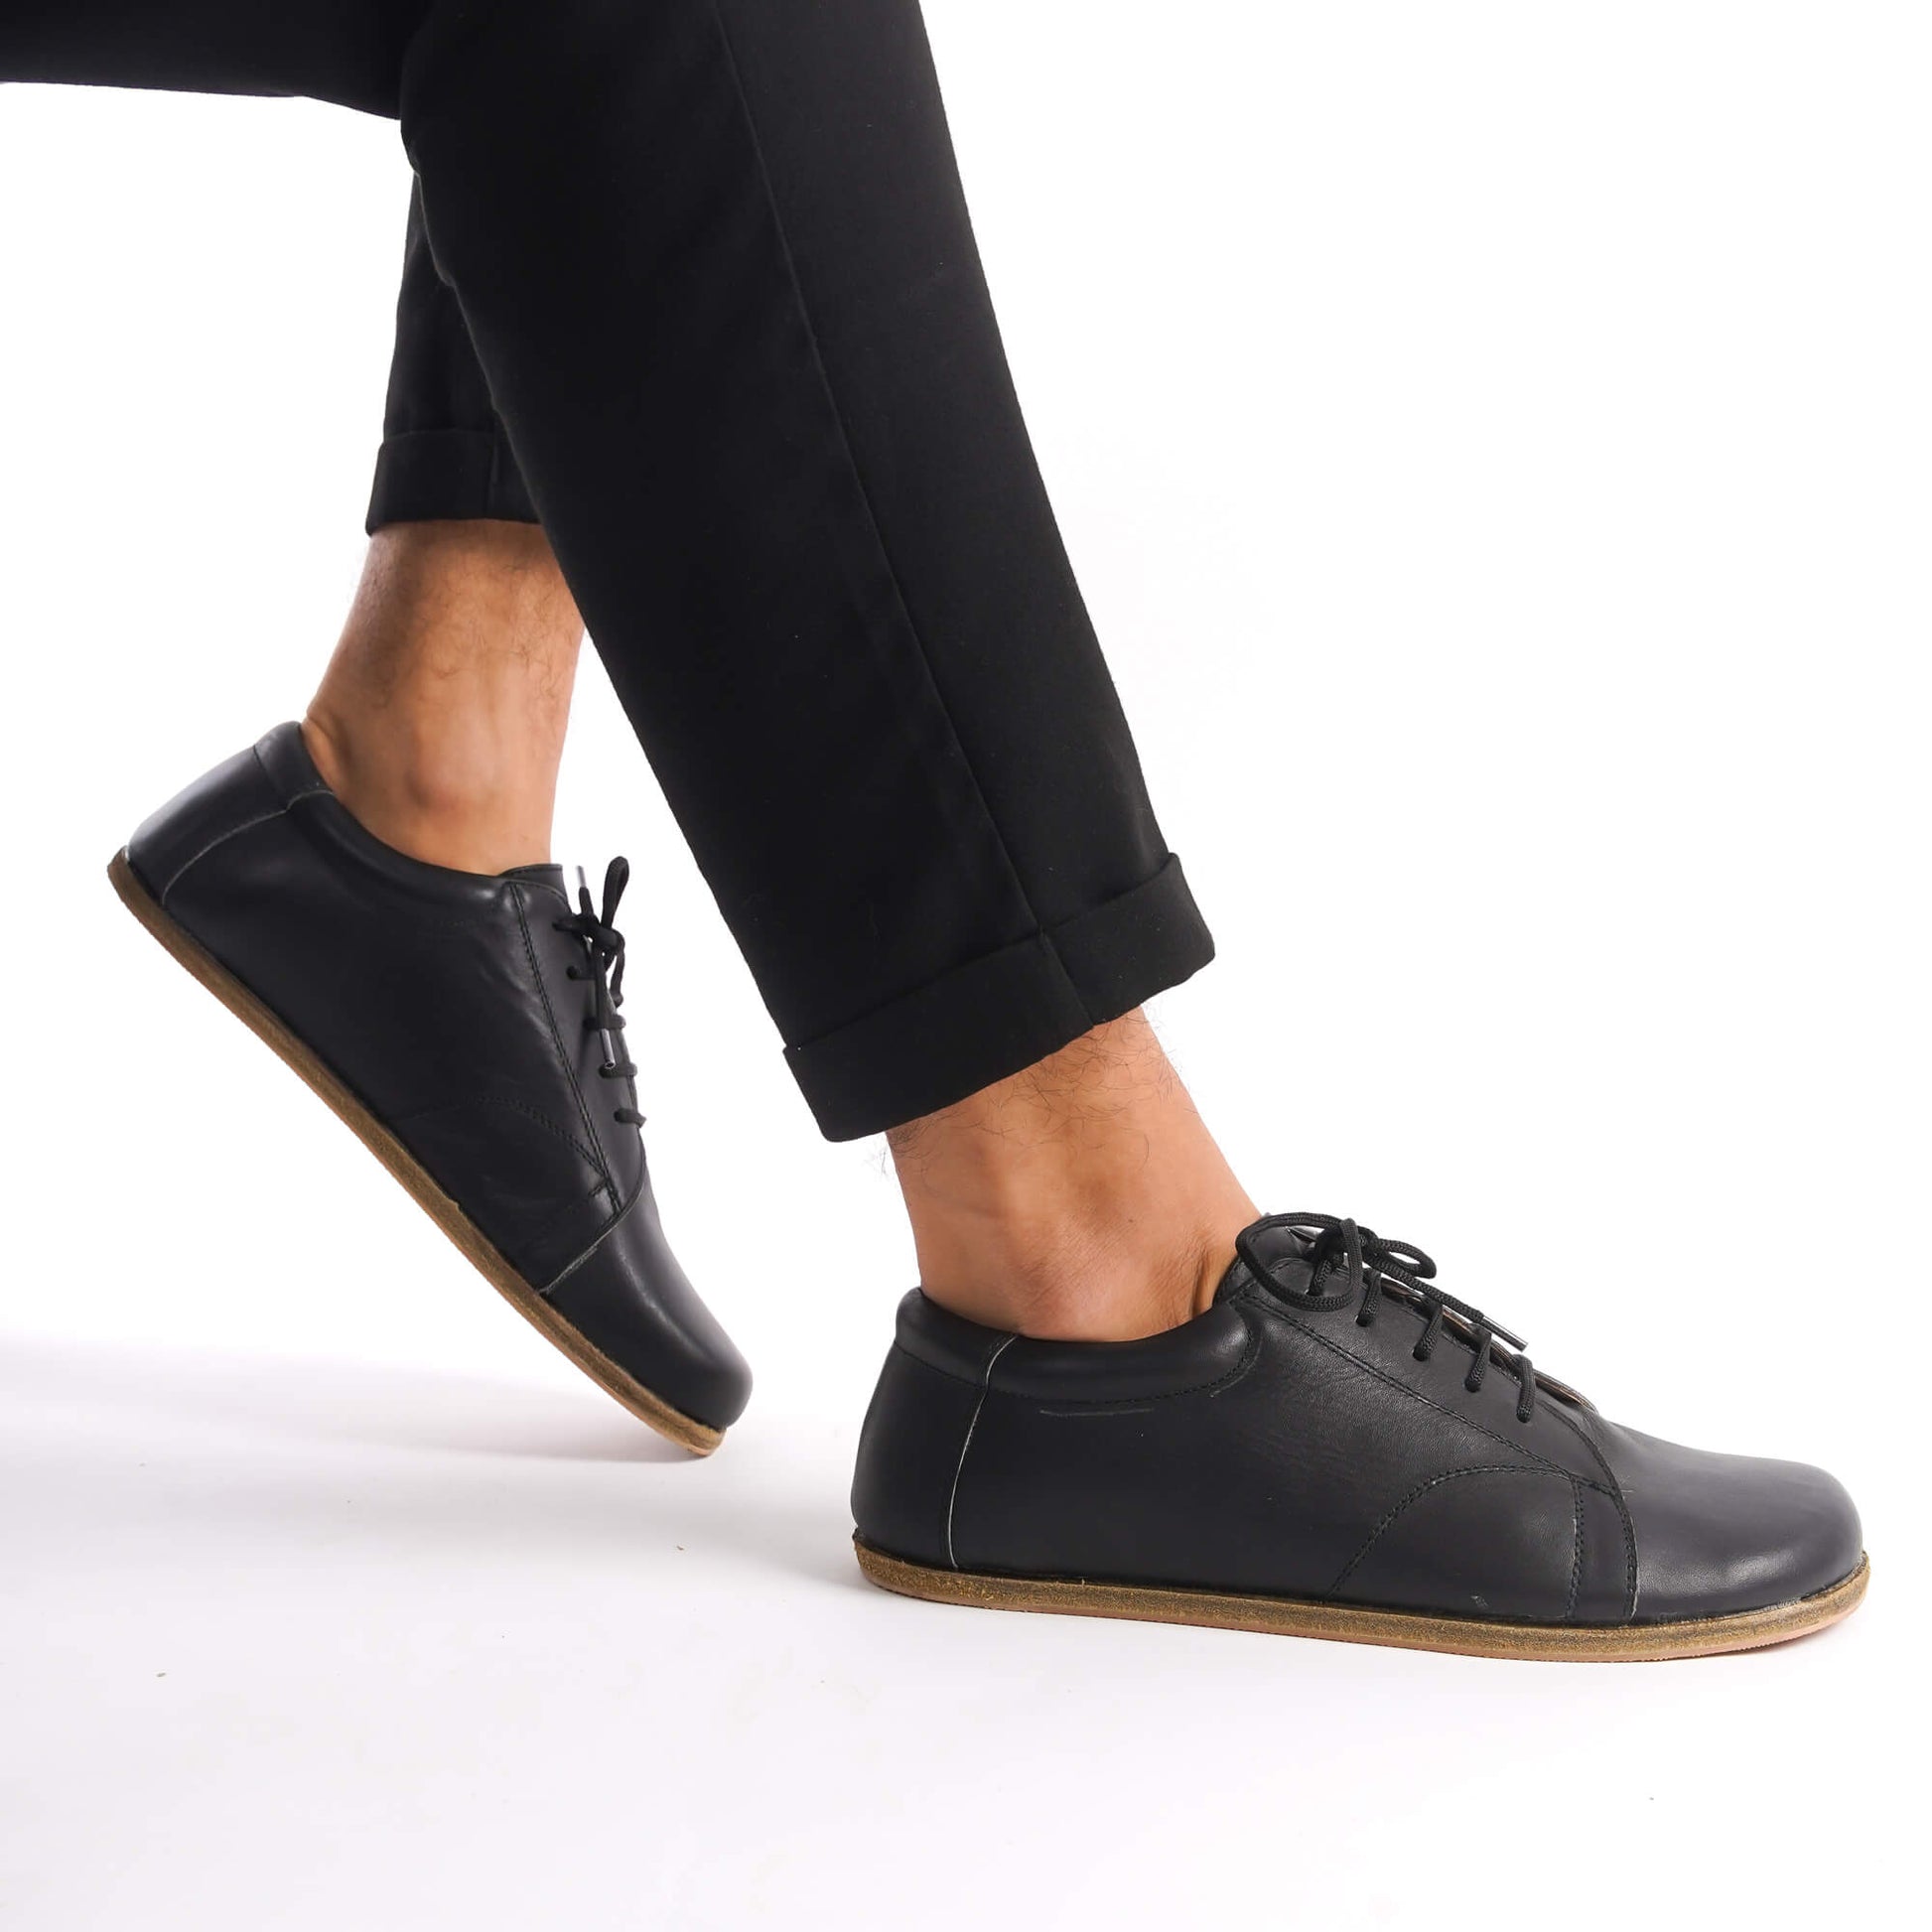 Side view of Black Lydia Leather Barefoot Men's Sneakers being worn, highlighting the minimalist design and natural foot alignment.